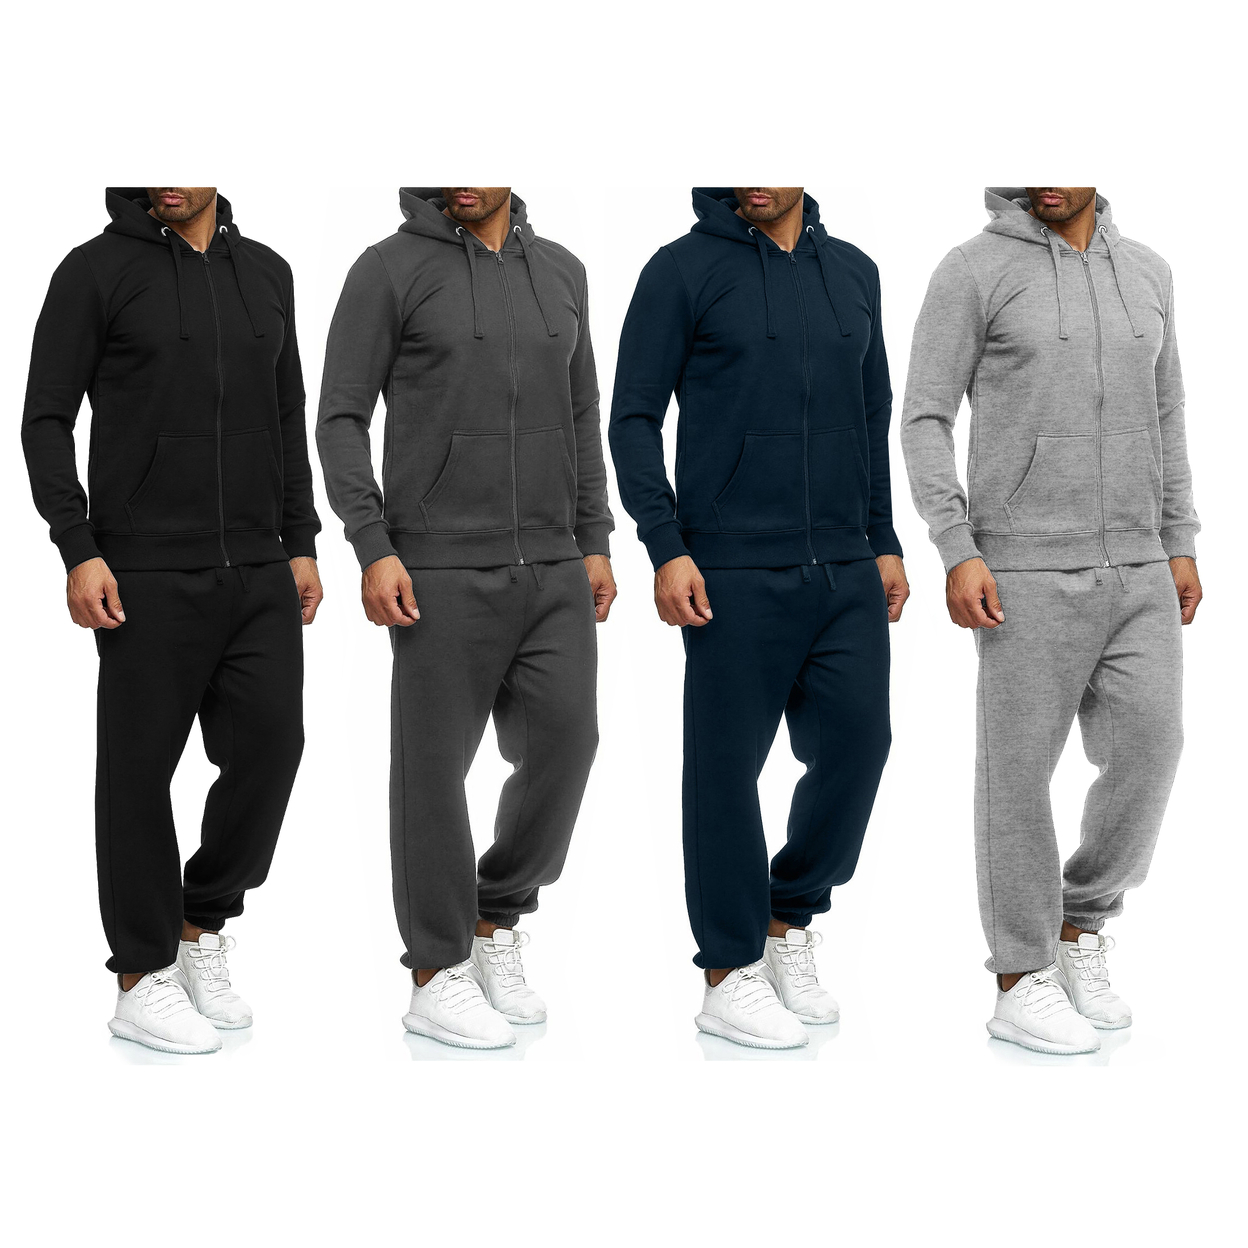 2-Pack: Men's Casual Big & Tall Athletic Active Winter Warm Fleece Lined Full Zip Tracksuit Jogger Set - Charcoal, 3xl